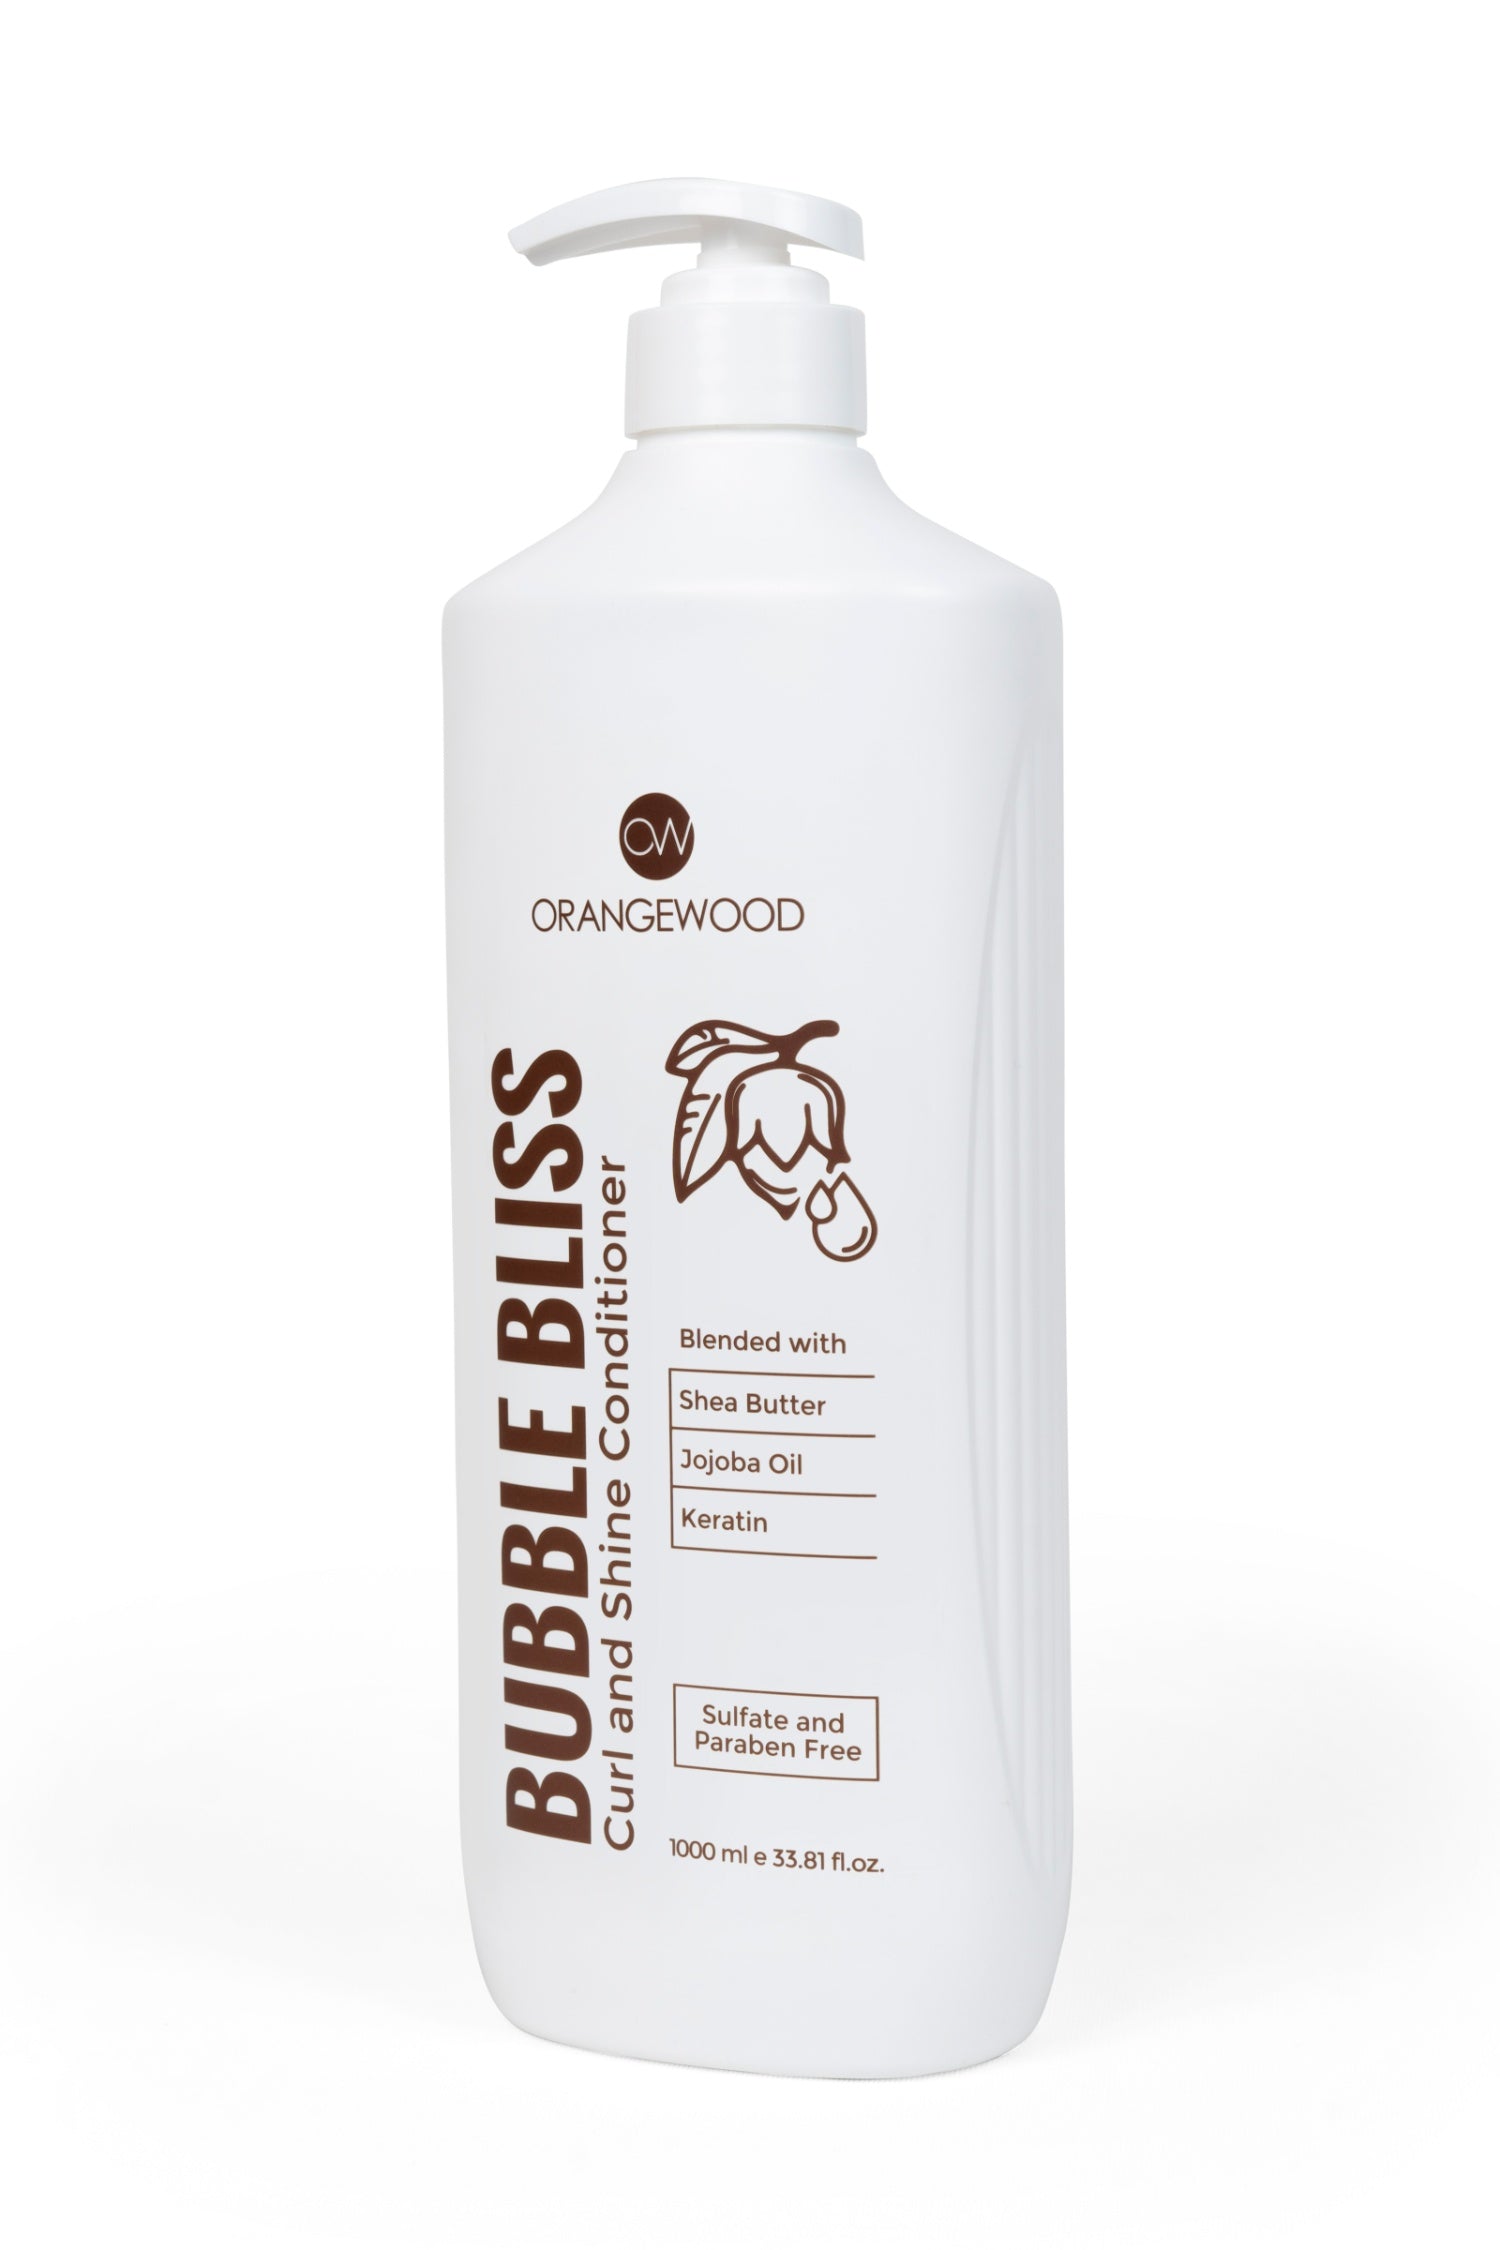 Orangewood Bubble Bliss Curl and Shine Conditioner - 1000ml